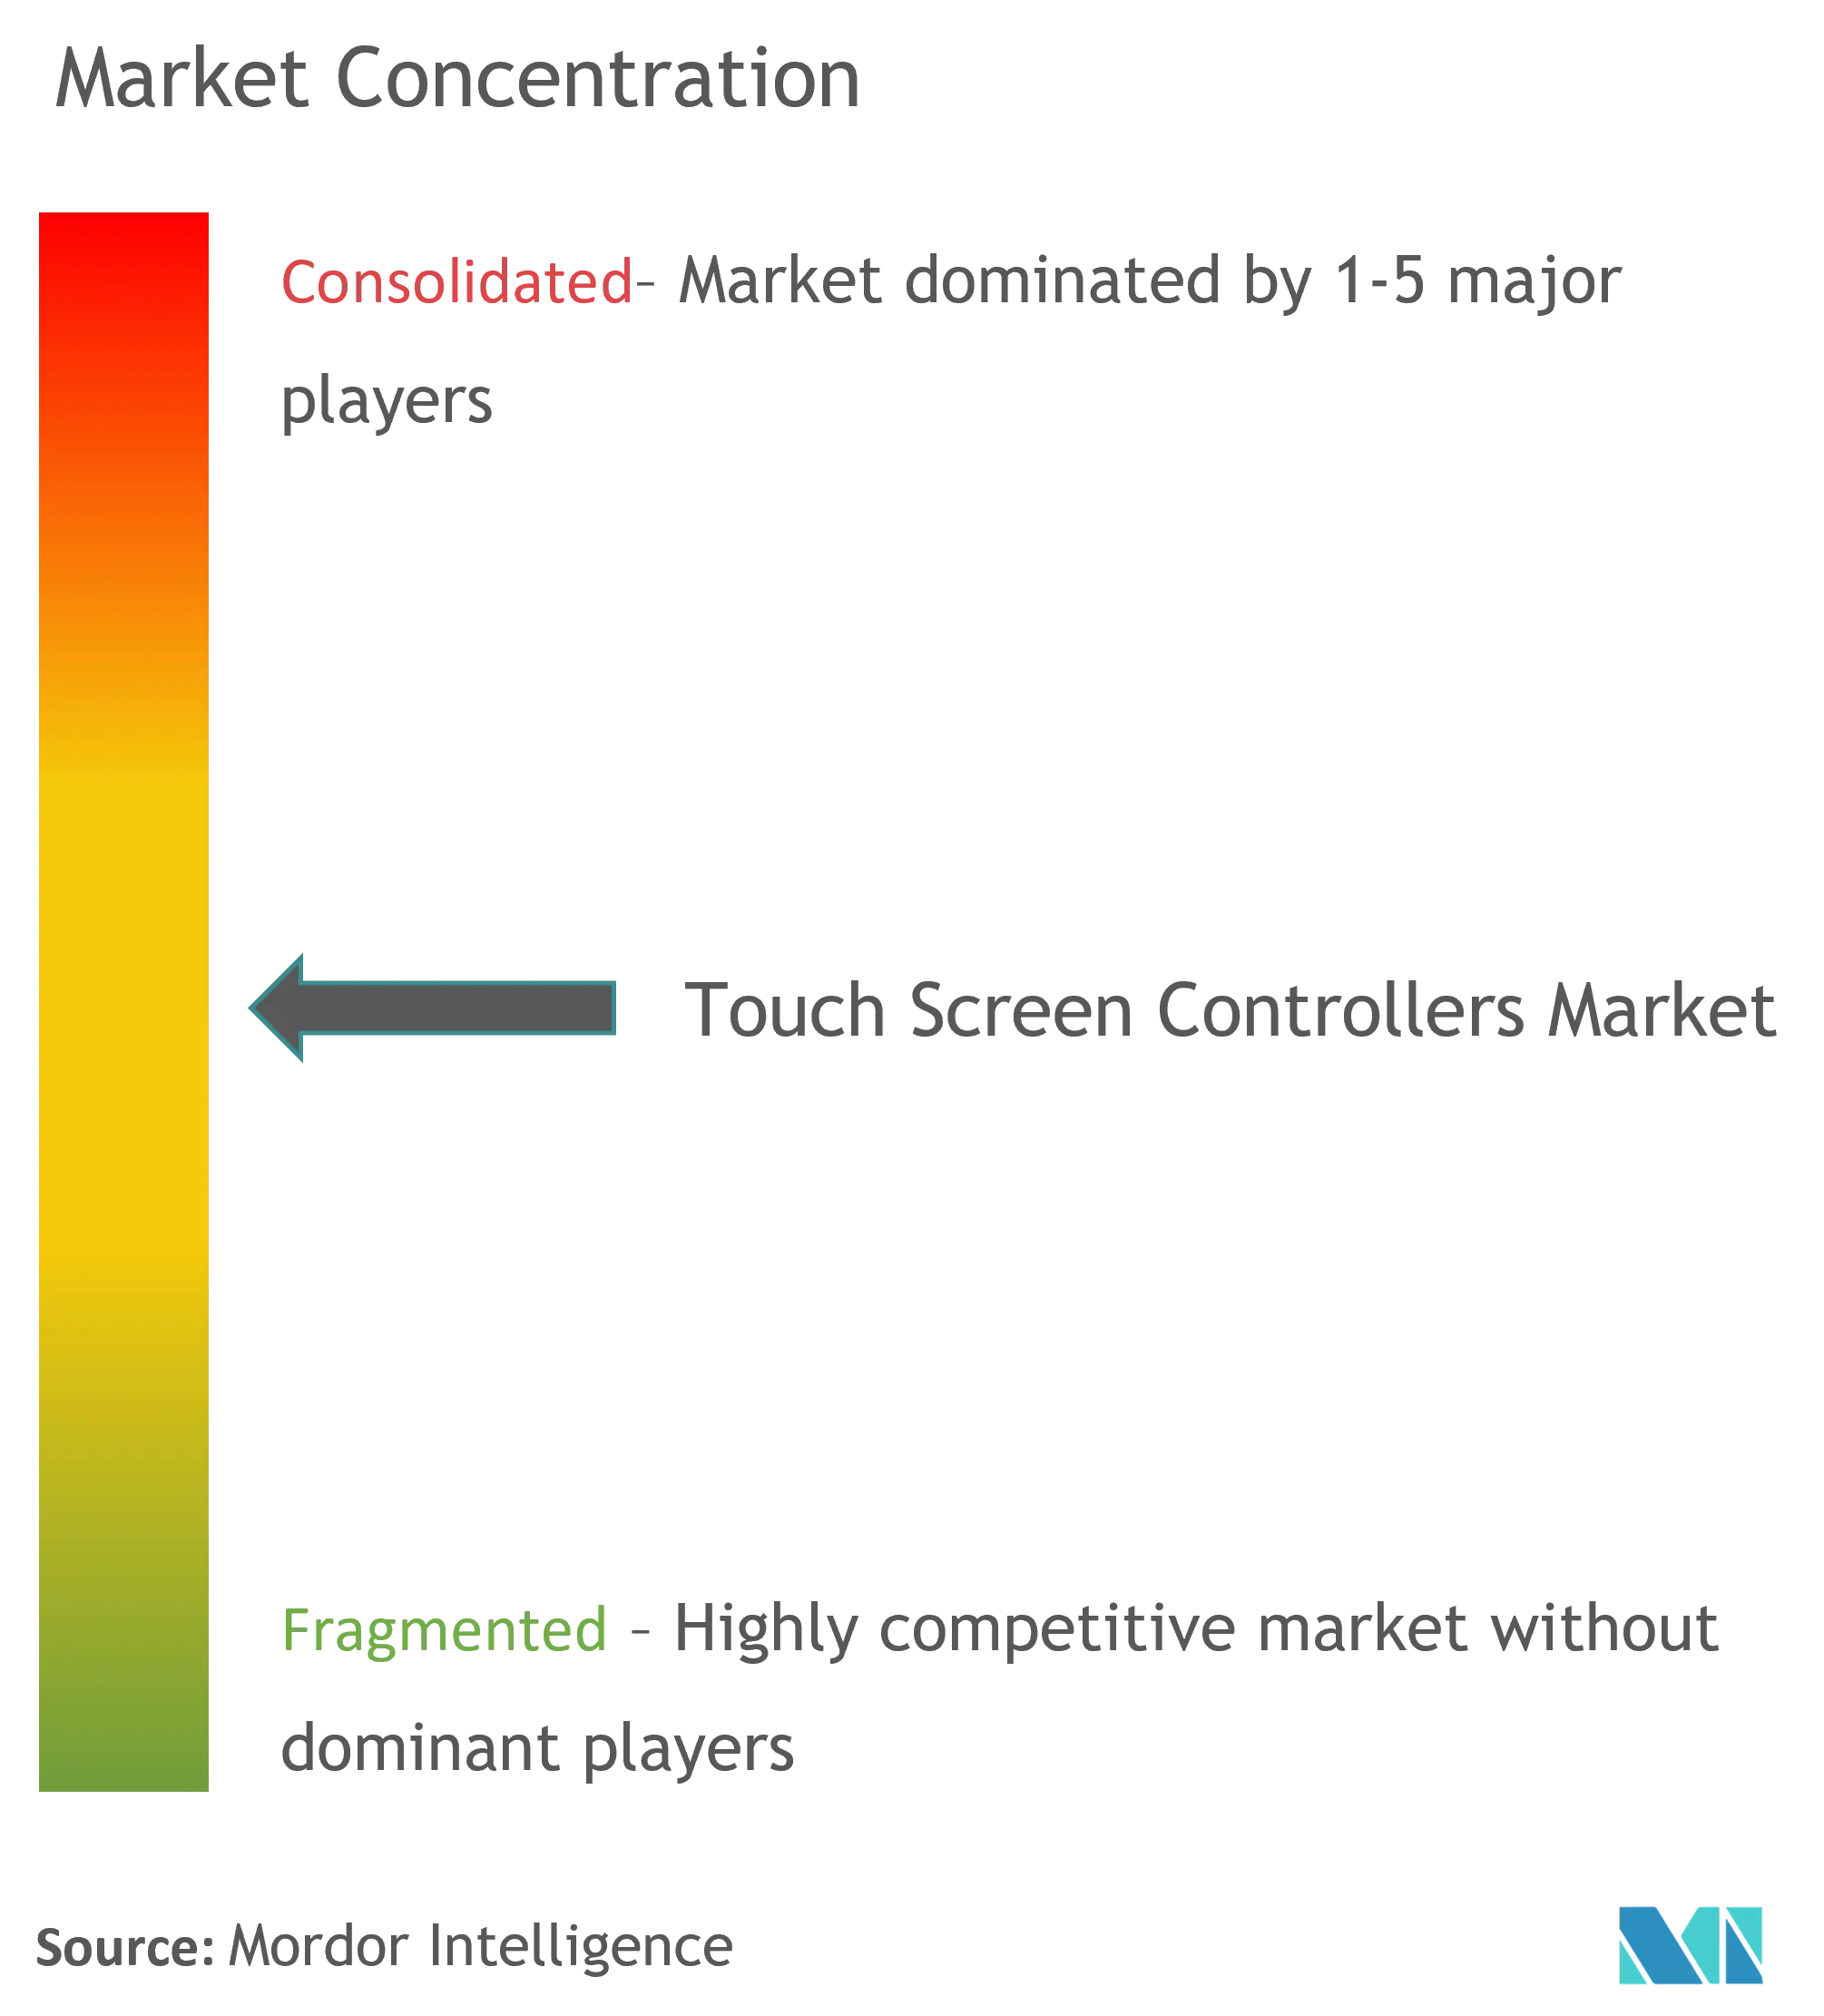 Touch Screen Controllers Market Concentration